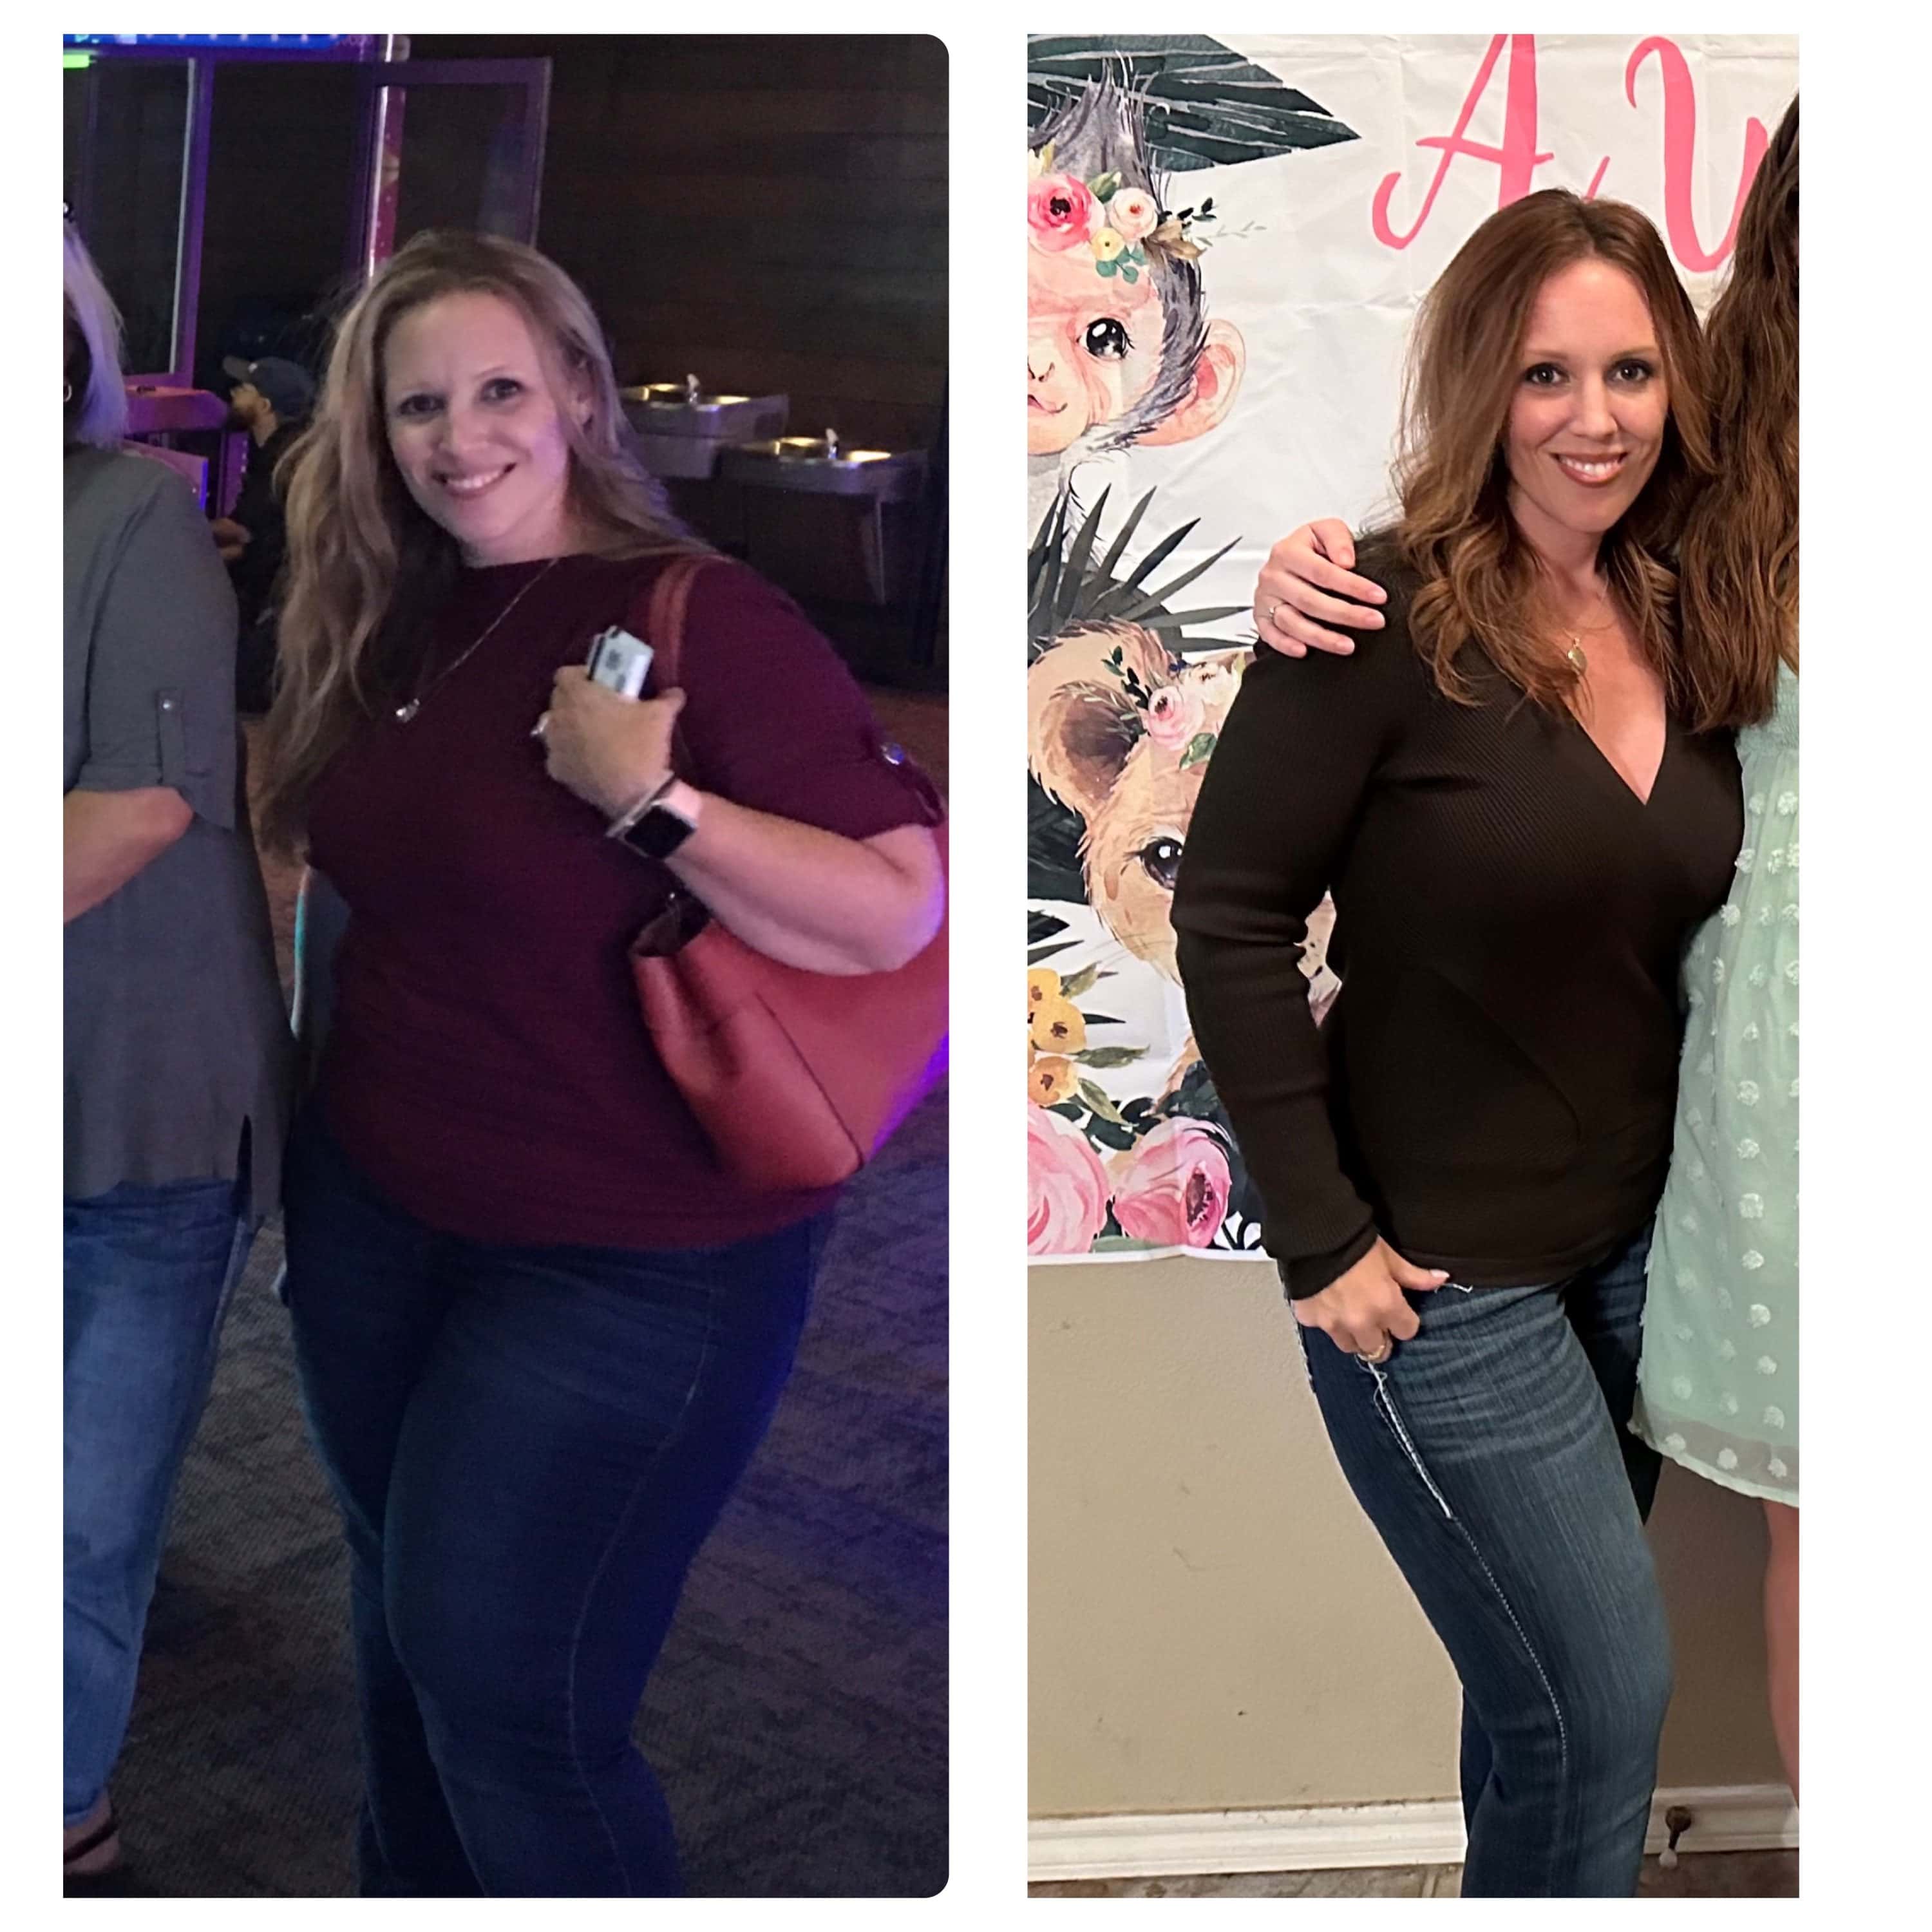 Weight Loss Surgery Gastric Sleeve before and after